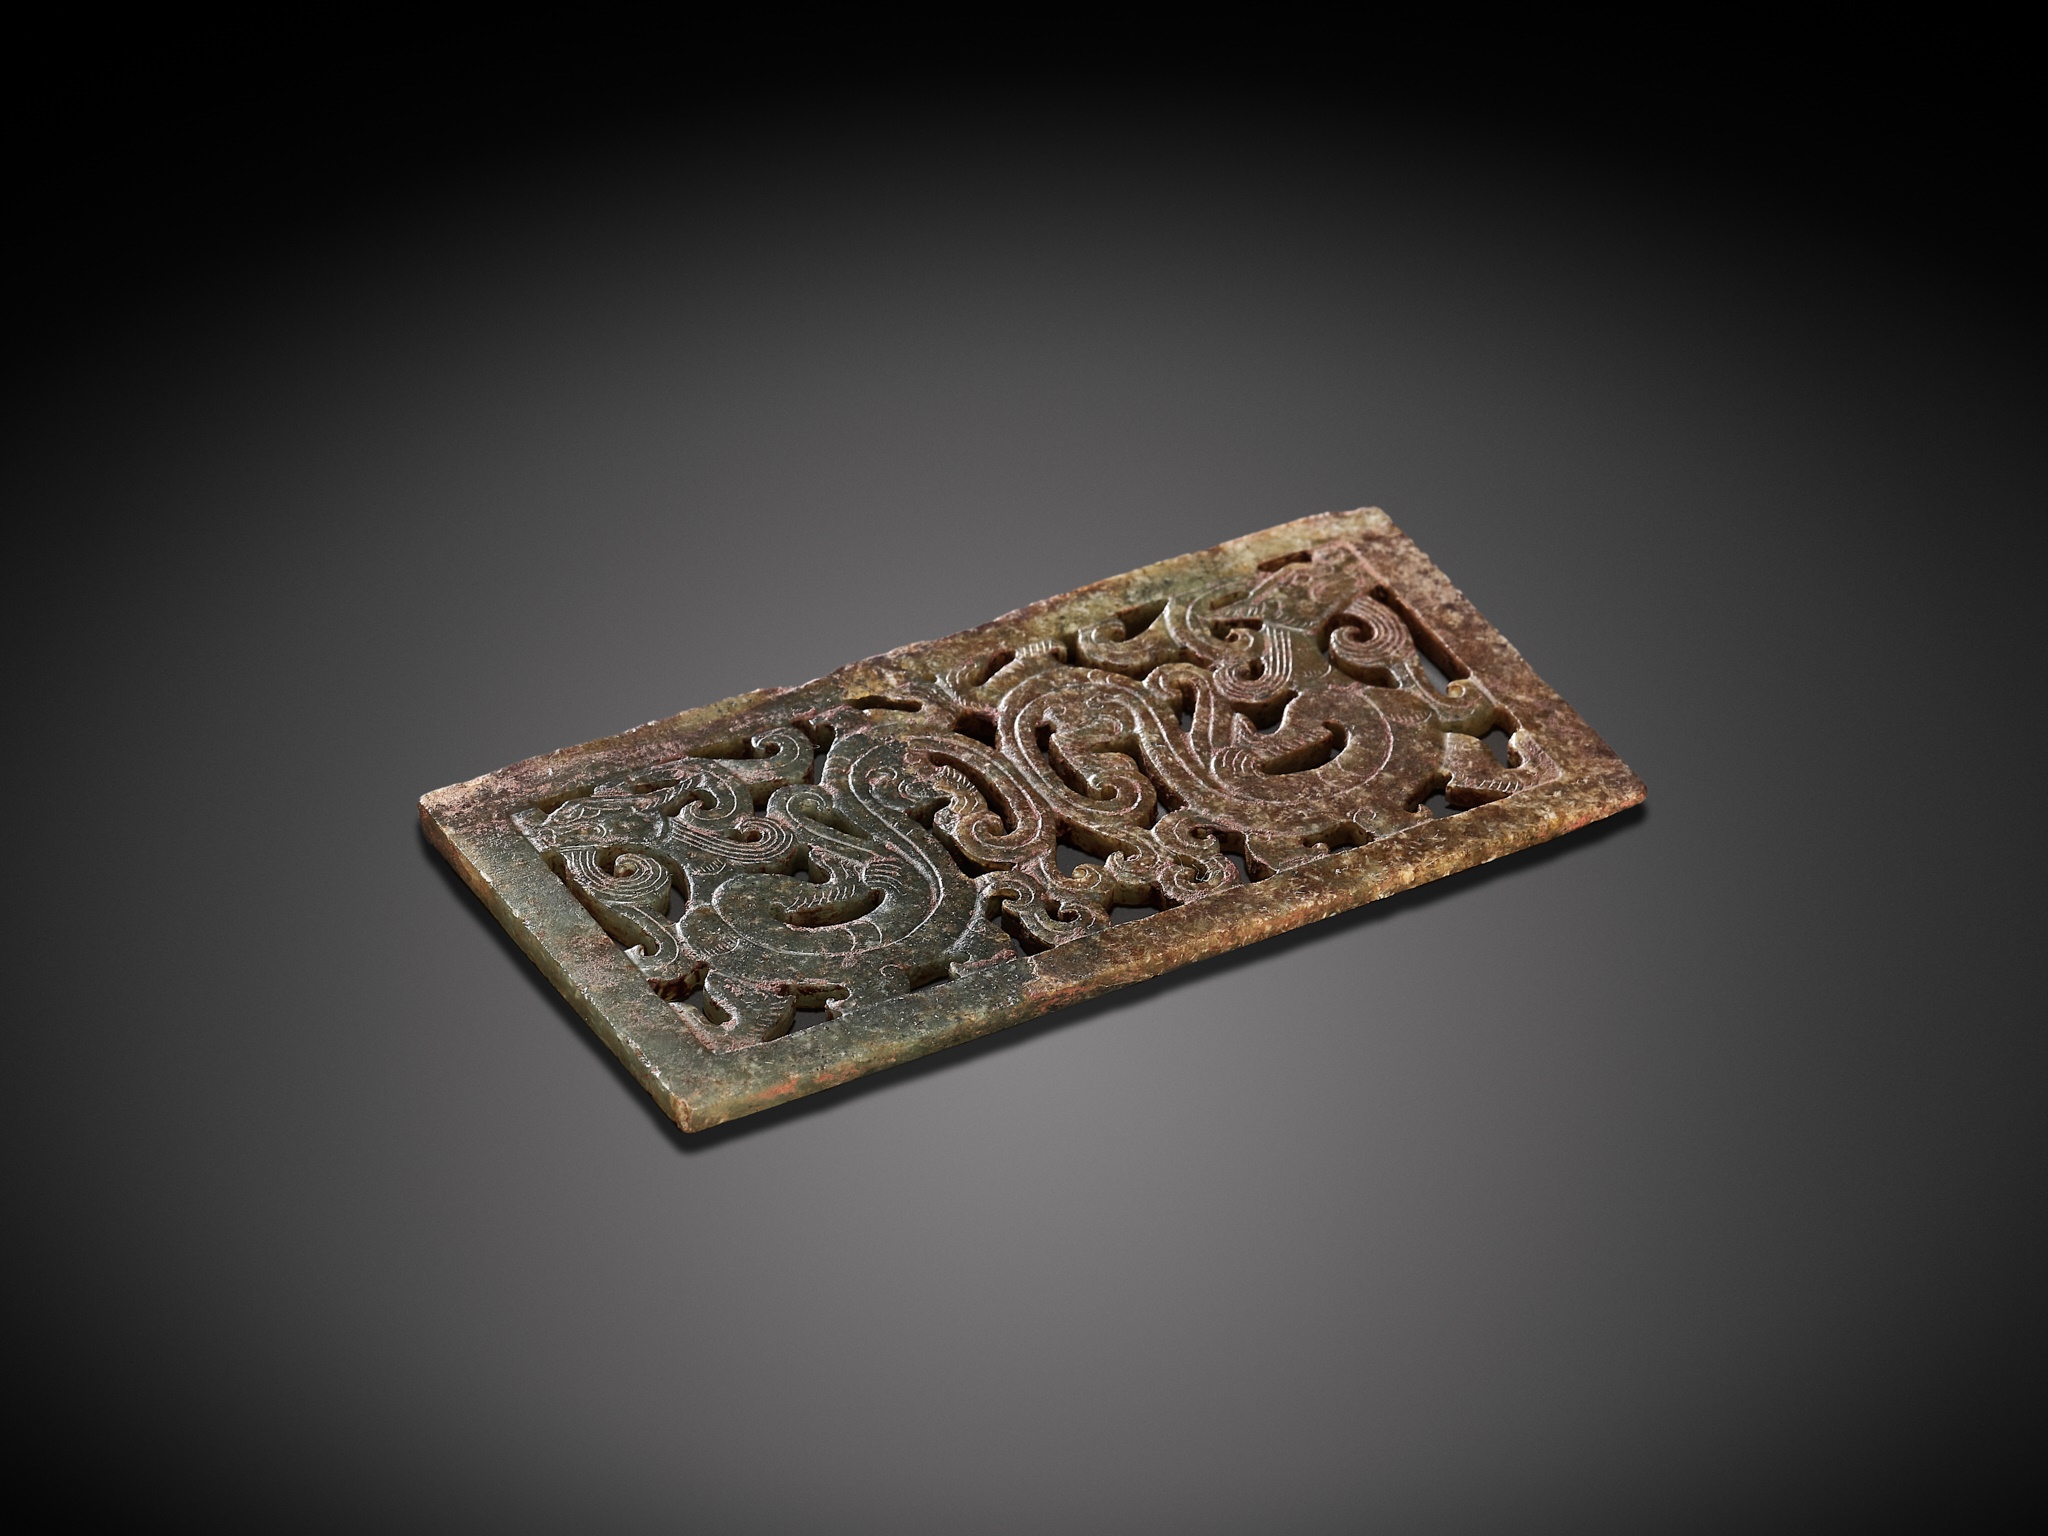 A RECTANGULAR GREEN JADE 'DOUBLE DRAGON' PLAQUE, LATE WARRING STATES PERIOD TO EARLY WESTERN HAN DYN - Image 9 of 12